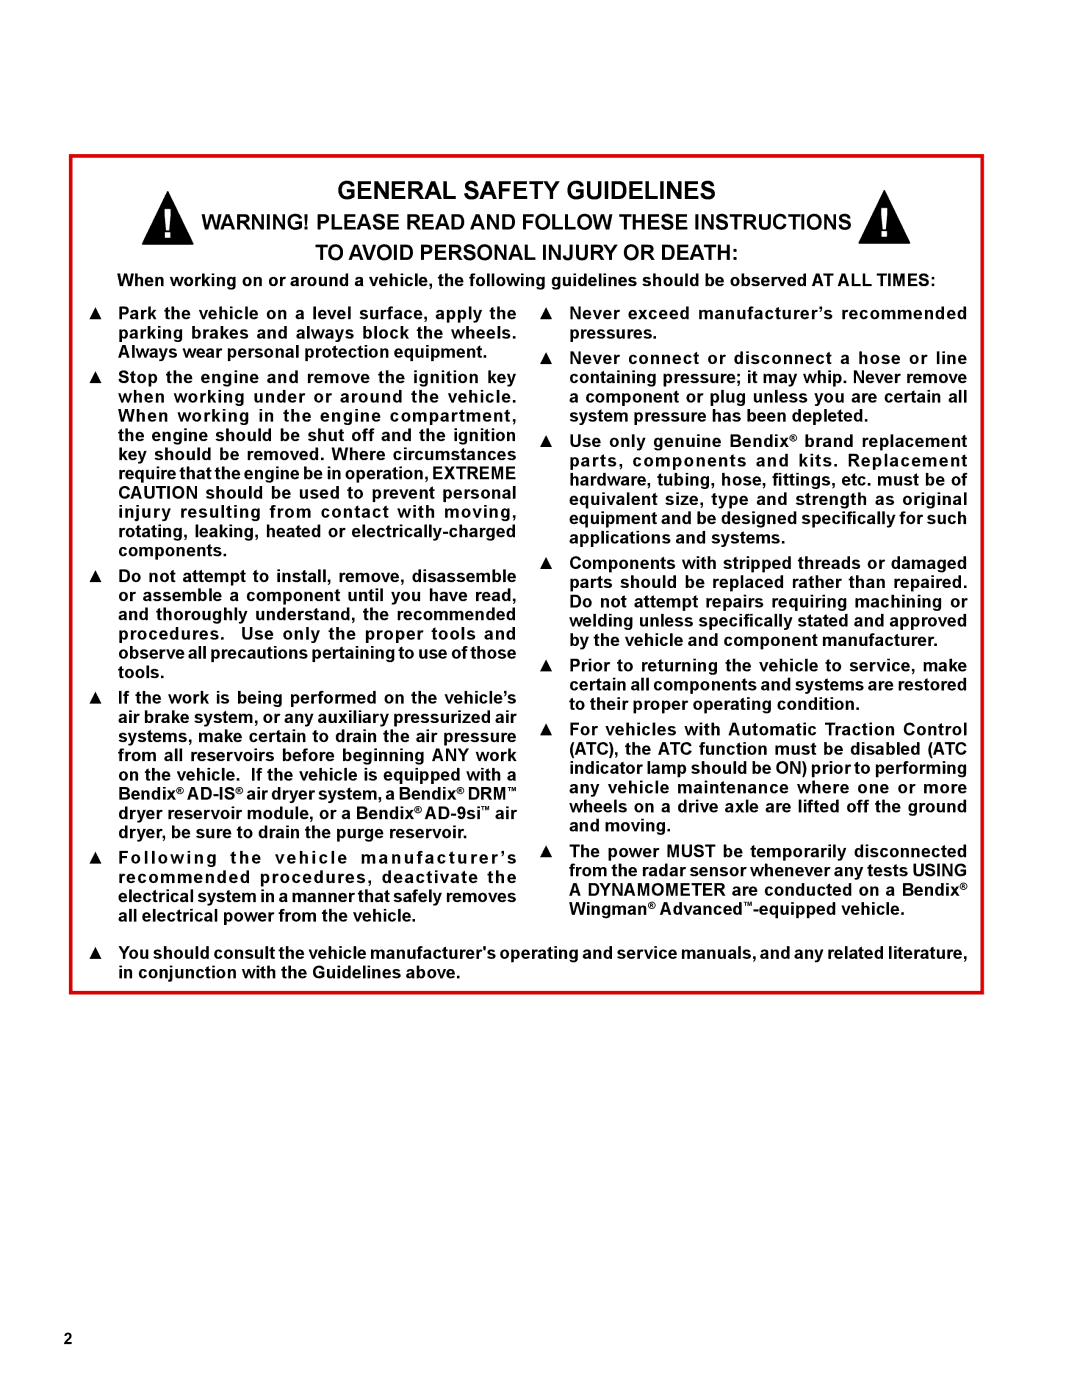 BENDIX SD-08-2418 manual General Safety Guidelines 